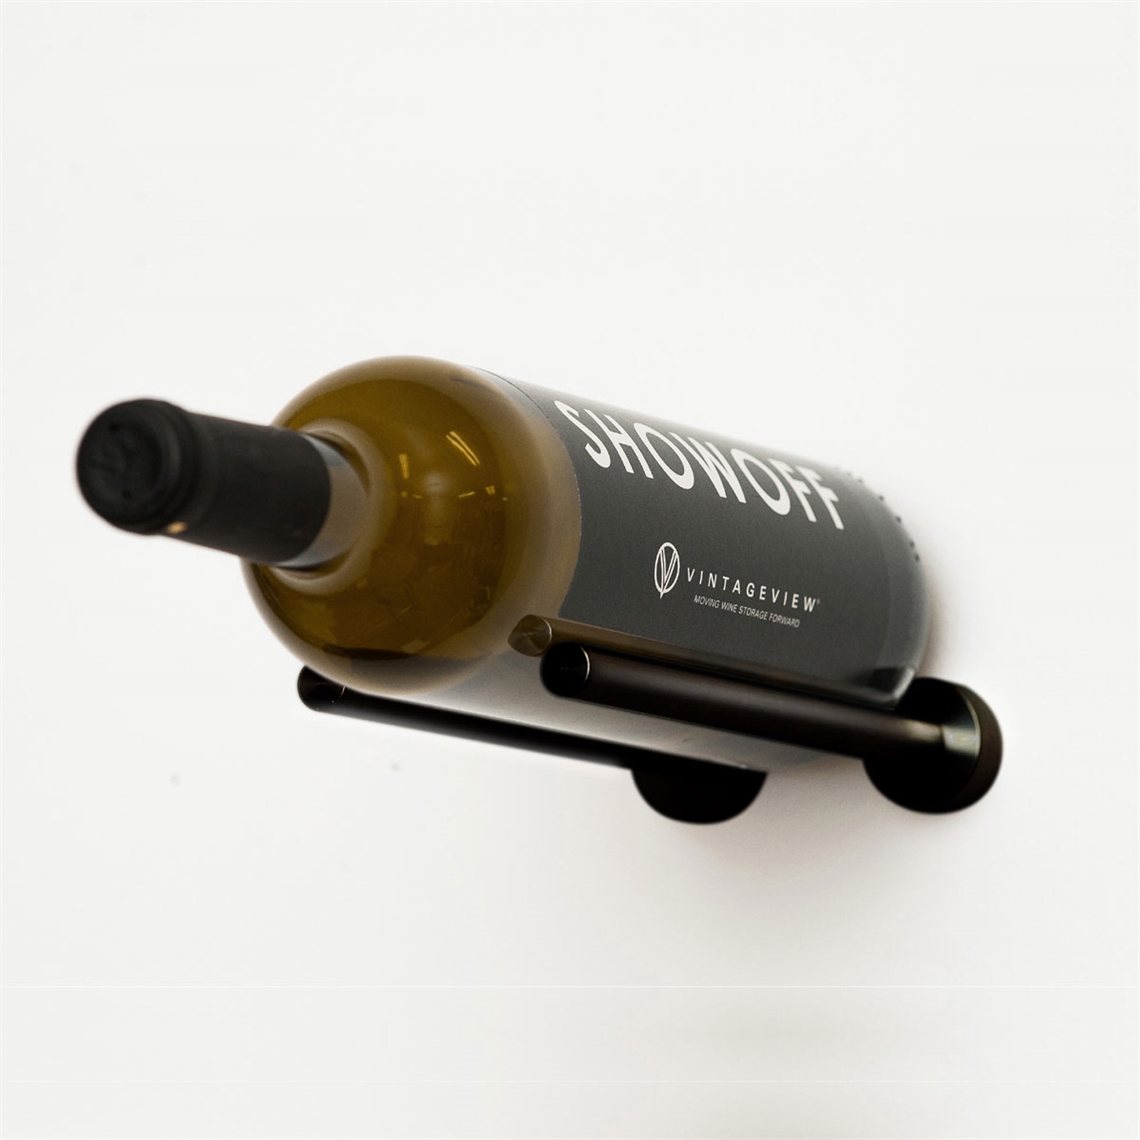 View more wine rack kits from our Wall Mounted Wine Racks range